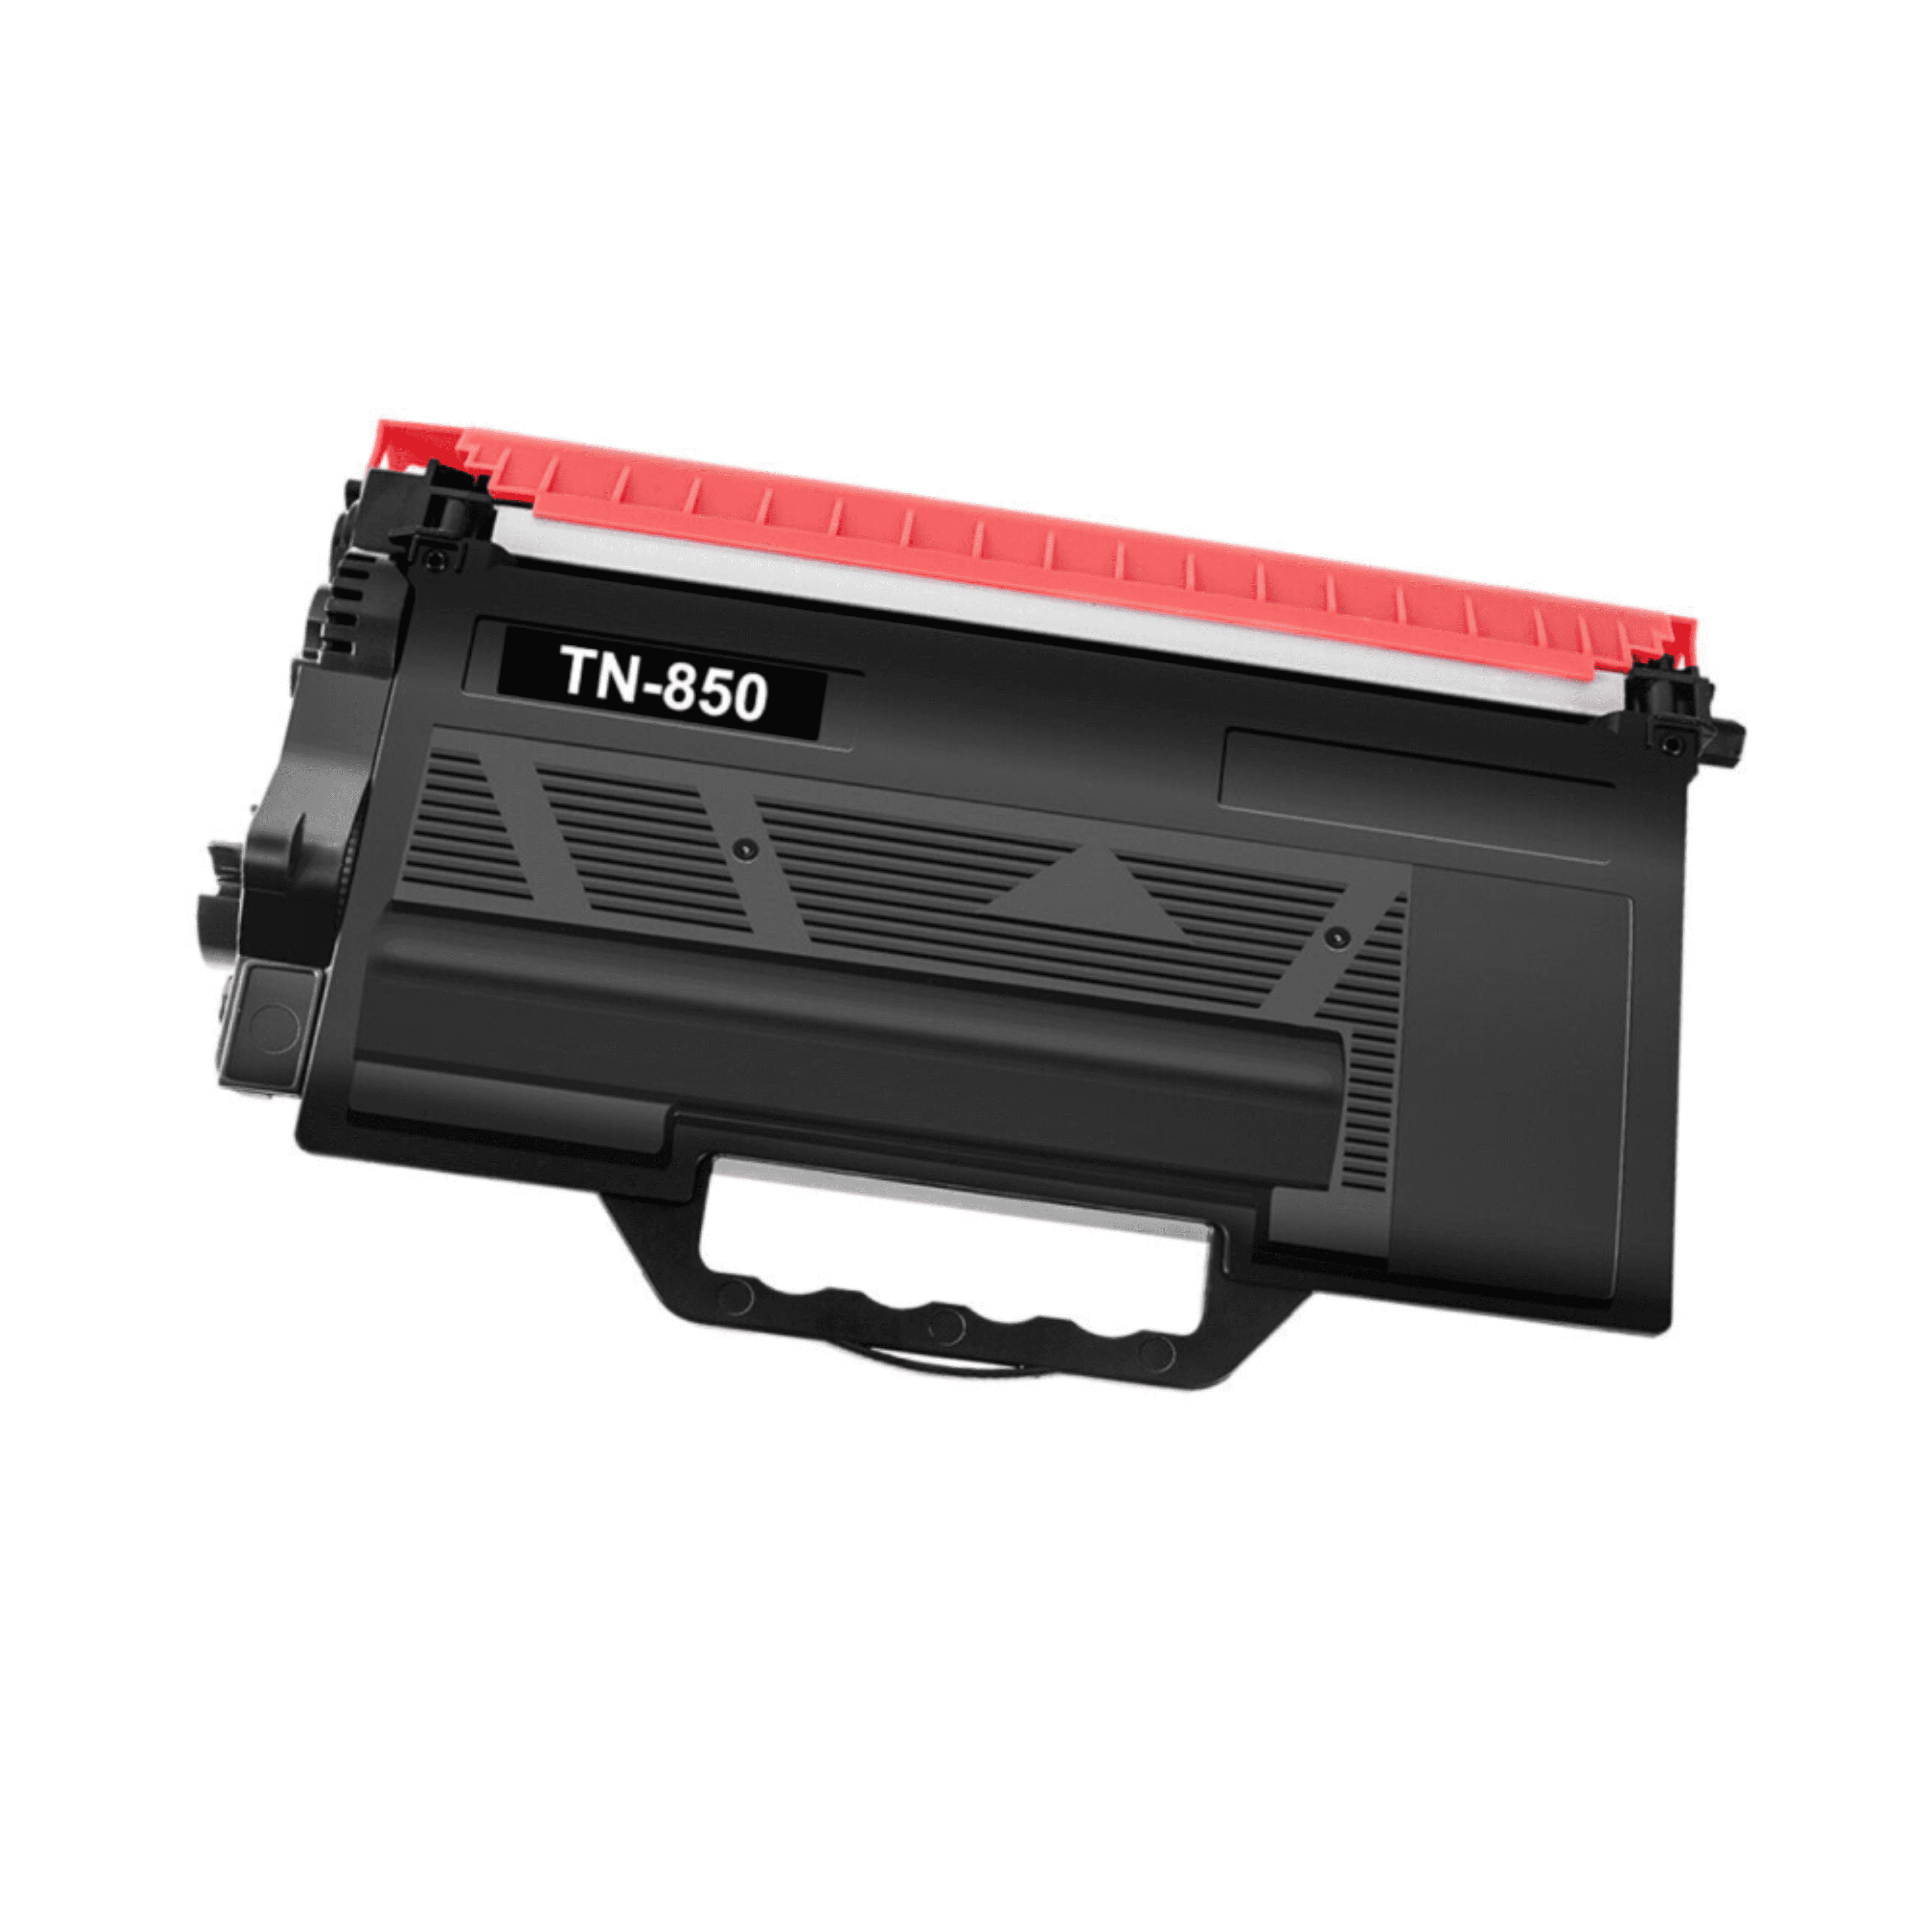 New High-Yield Toner Cartridge For Brother TN850 DCP-L5500DN 5600DN 5650DN 6600DW HL-L5000D 5100DN 5100DNT MFC-L5700DN 5700DW More Walmart.com